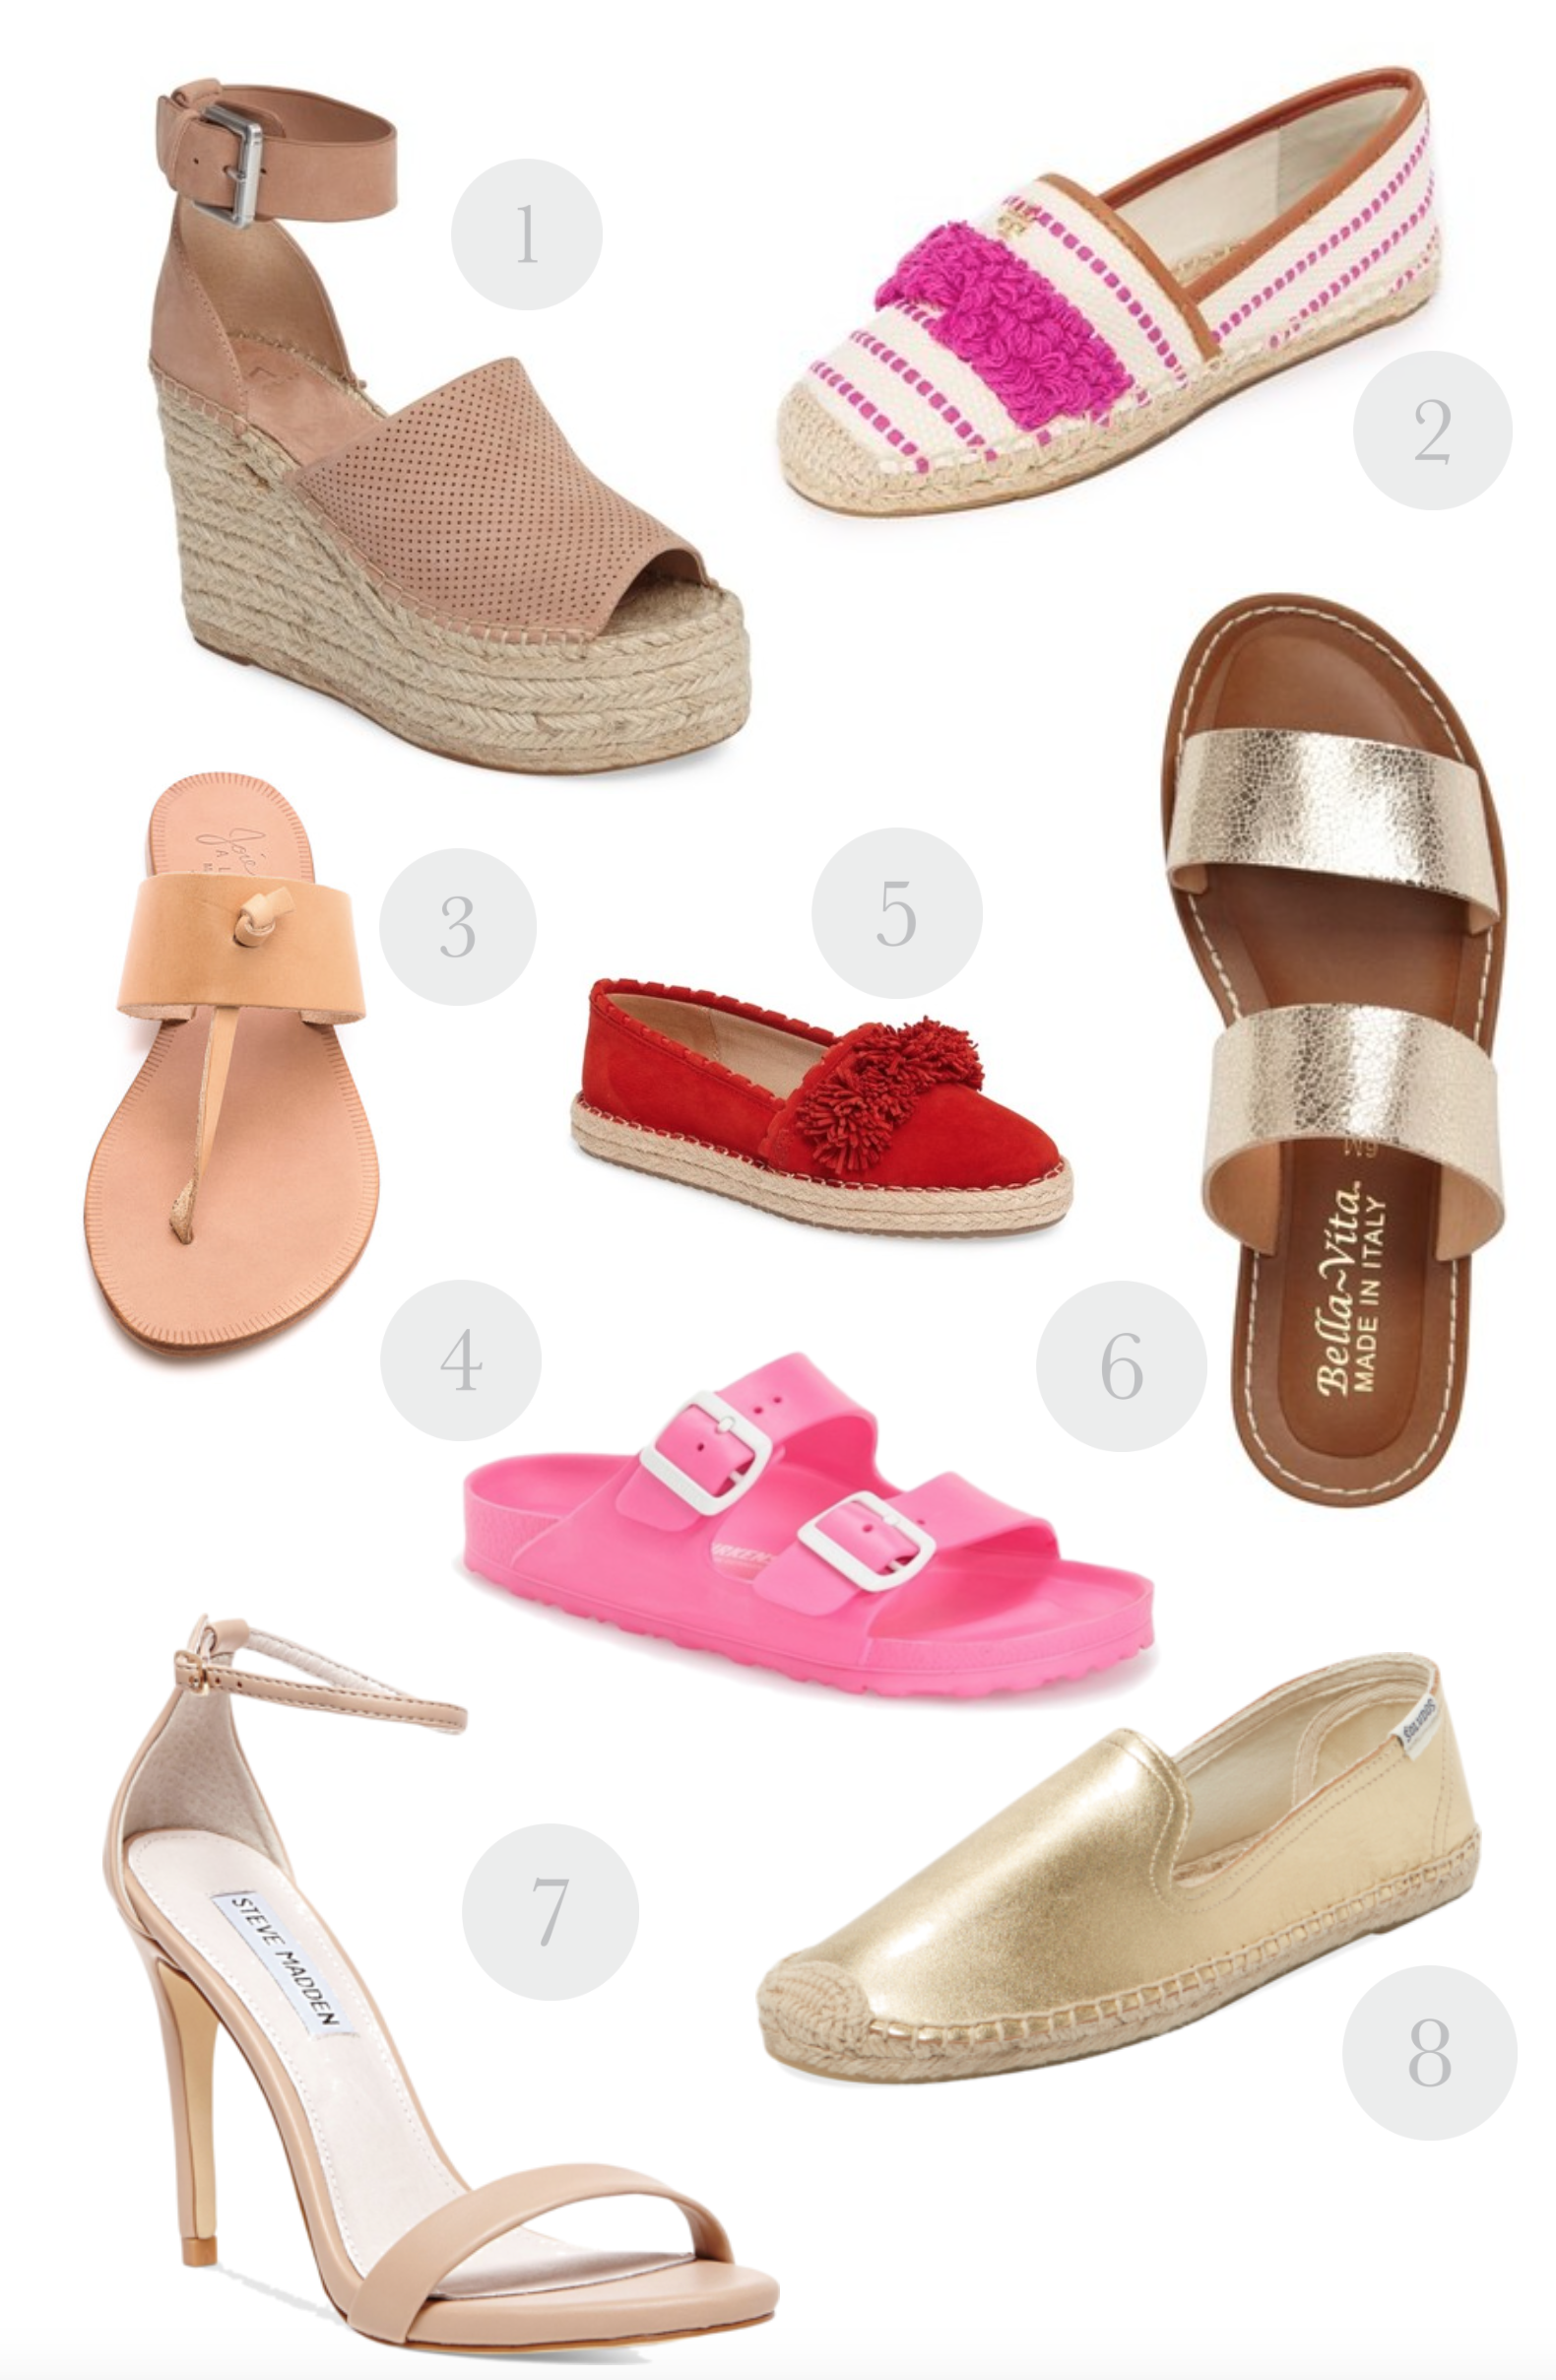 Summer Shoes I Can’t Stop Thinking About